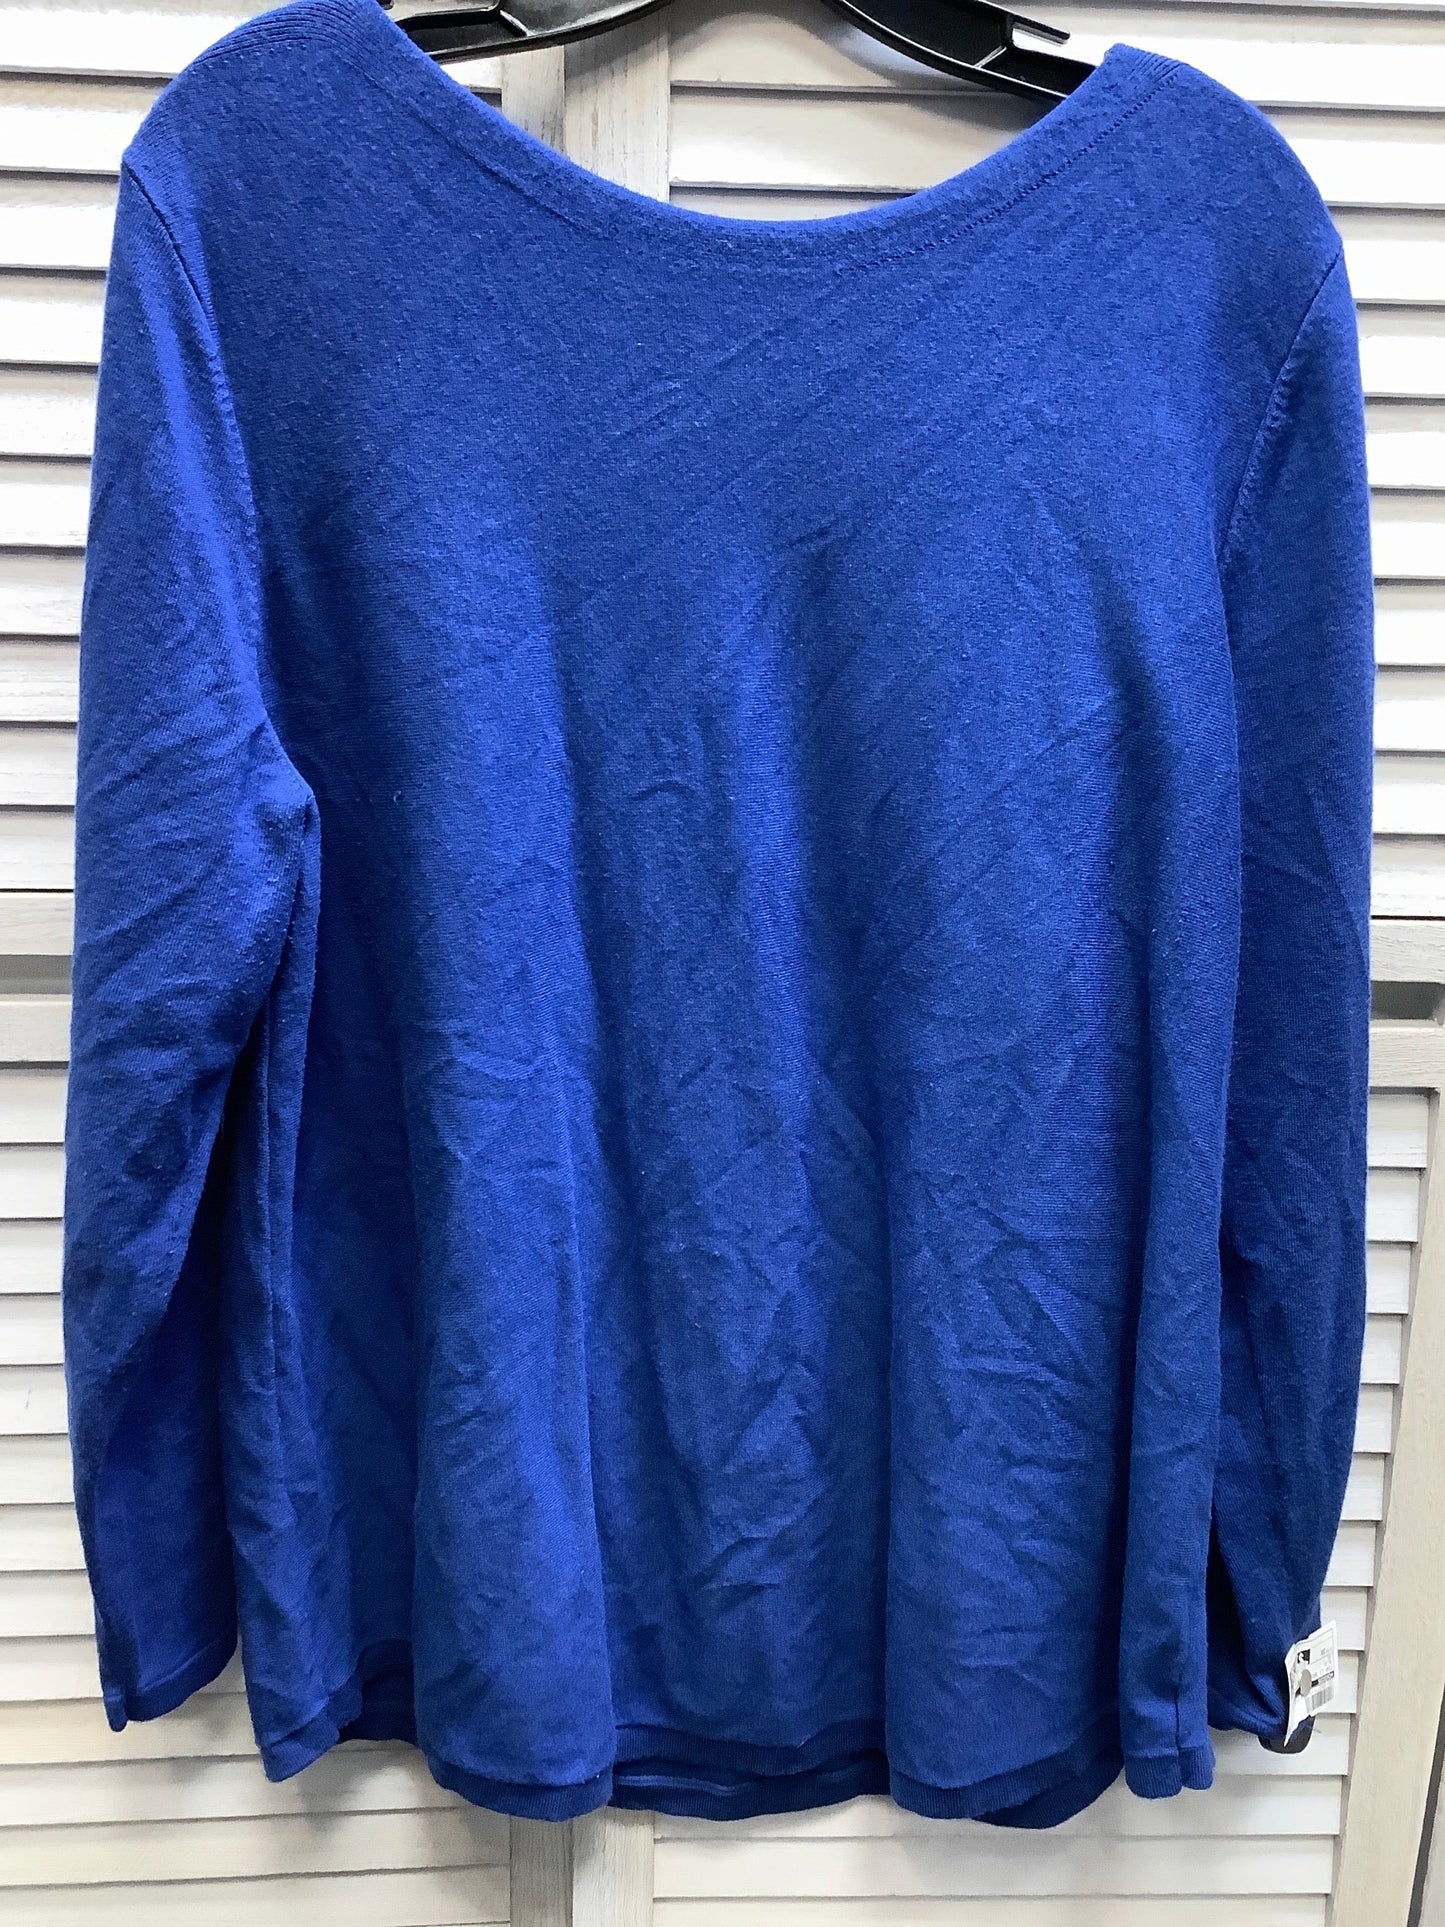 Blue Top Long Sleeve Basic Chicos, Size 3x